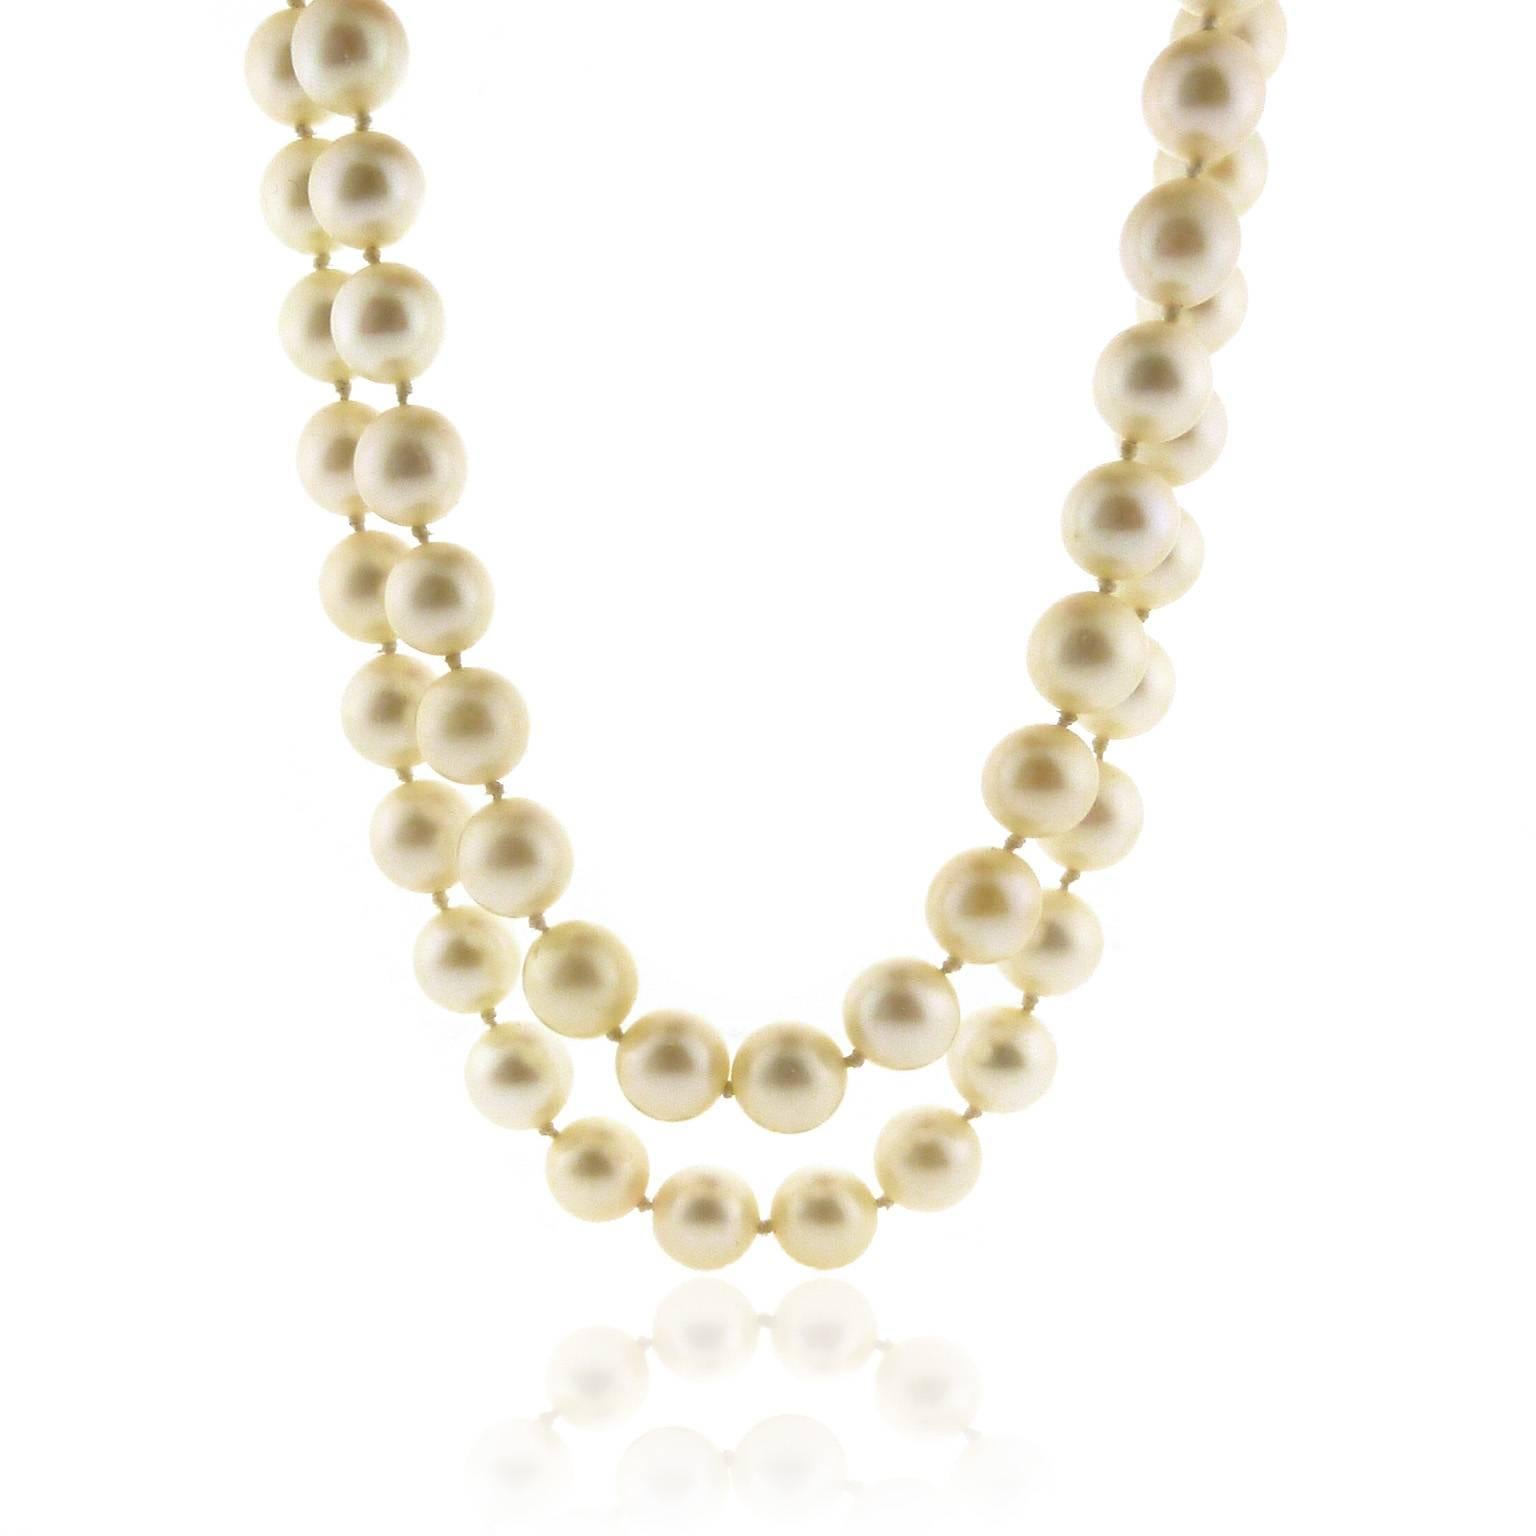 Two strands of cultured pearls measure 7.5 to 8.0 millimeter. Color is cream, luster is high, pearls are just off round, surface is very good. Shortest strand measures 14.75 inches including the clasp. Clasp is 14 karat white gold with 6 mine cut